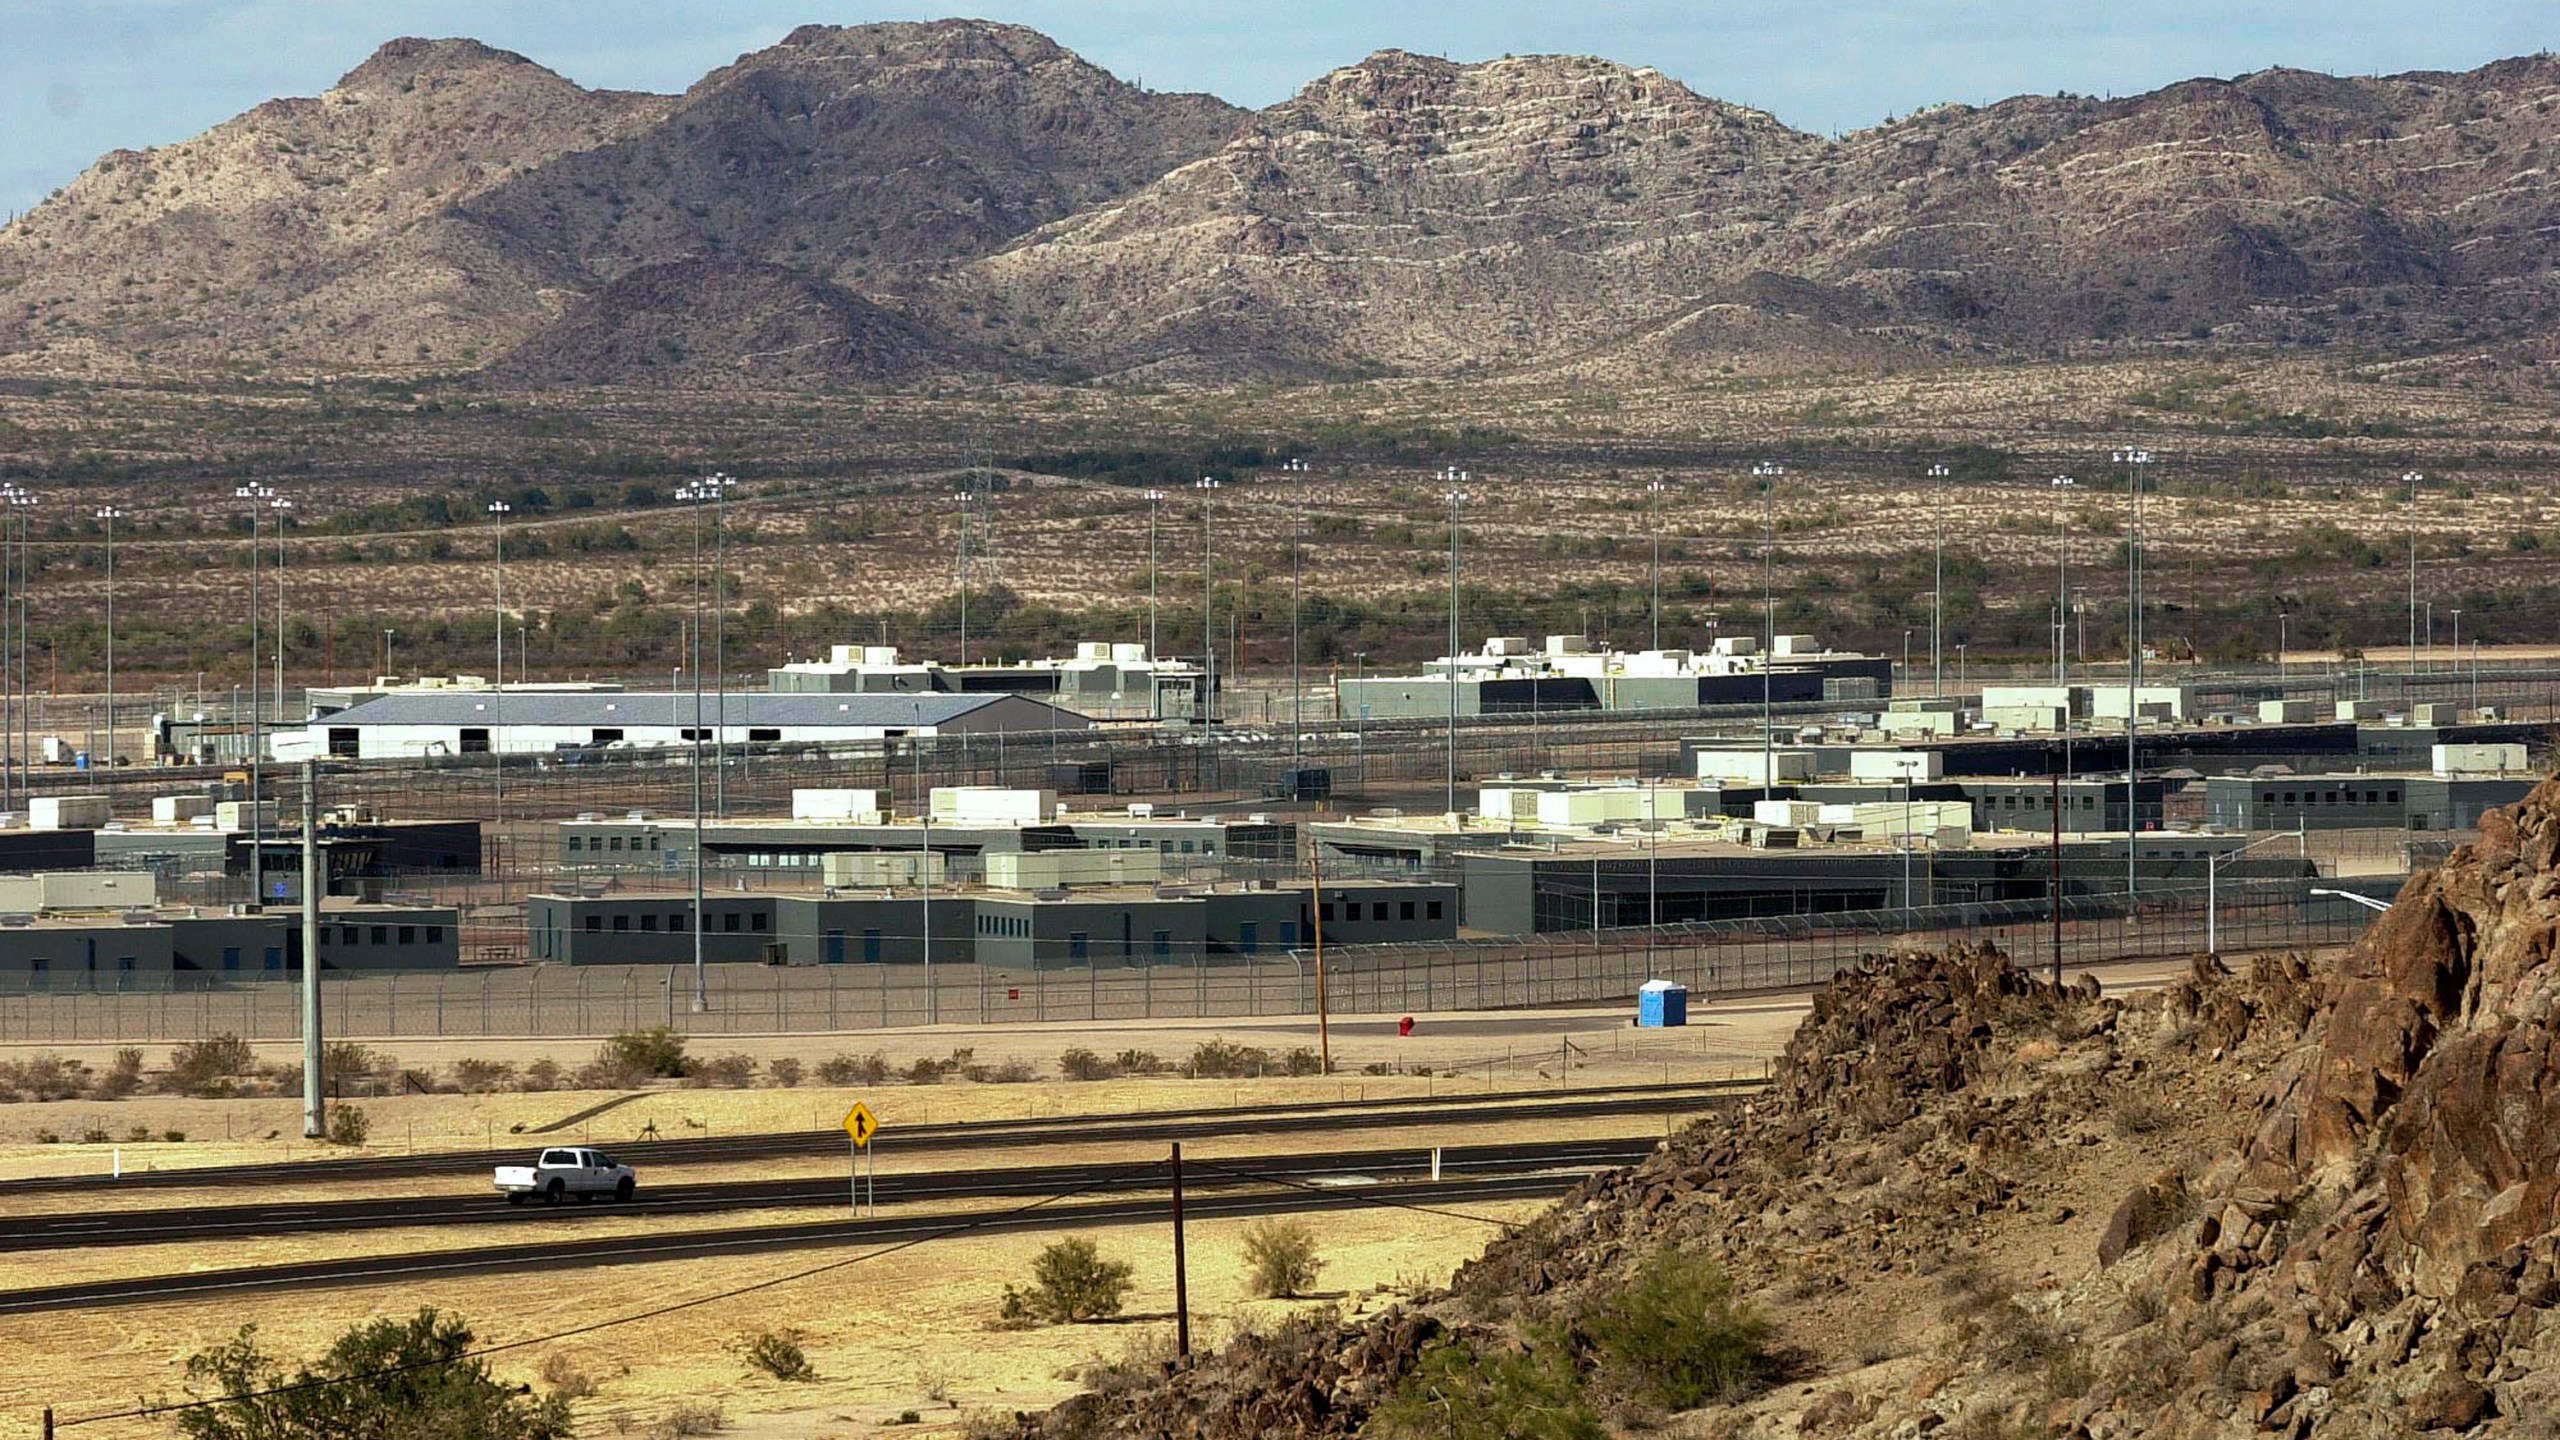 FILE - This Jan. 20, 2004, file photo shows the Arizona State Prison Complex-Lewis in Buckeye, Arizona. On Friday, March 15, 2024, a judge held a hearing in U.S. District Court in Phoenix to examine Arizona's noncompliance with a court order to improve medical and mental health care for the nearly 25,000 people incarcerated in Arizona's state-run prisons. (AP Photo/Tom Hood, File)